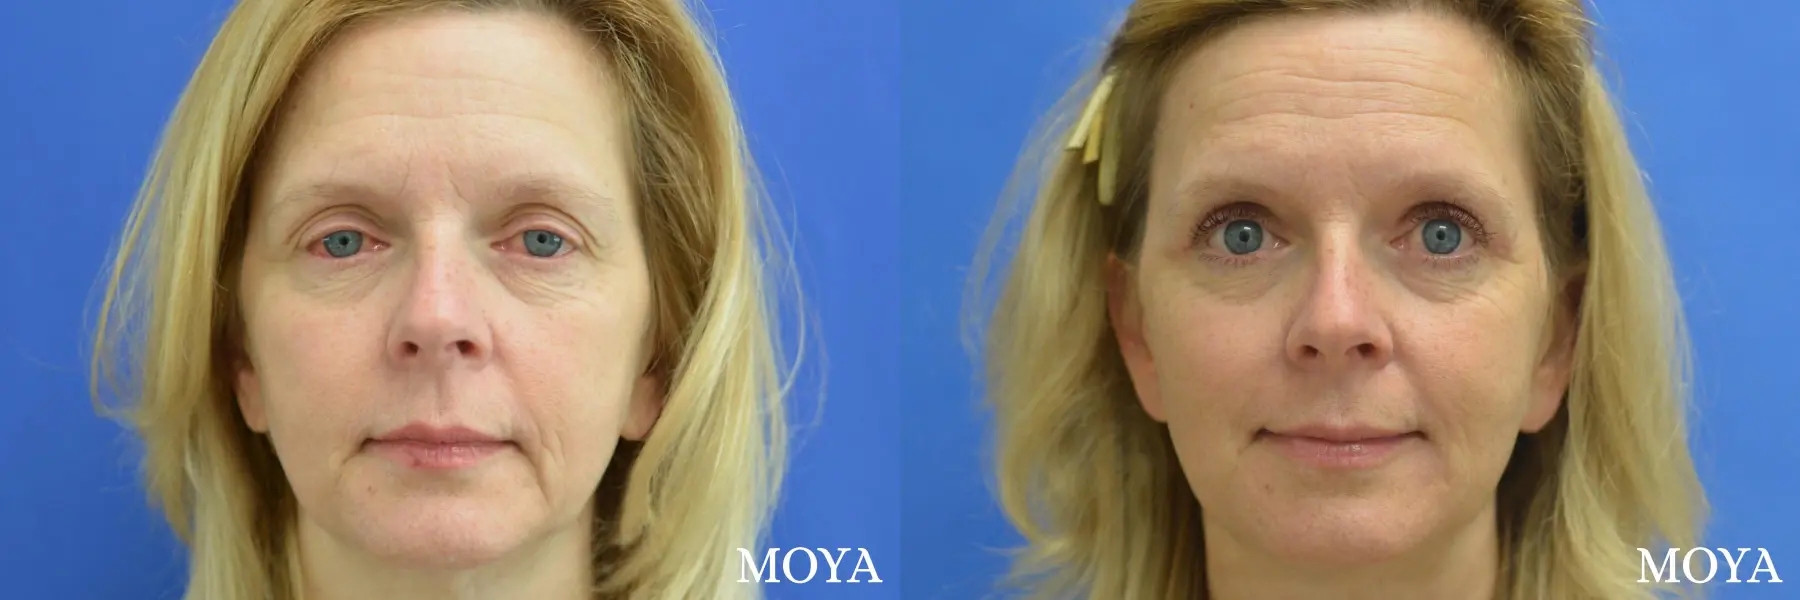 Eyelid Lift: Patient 3 - Before and After 1